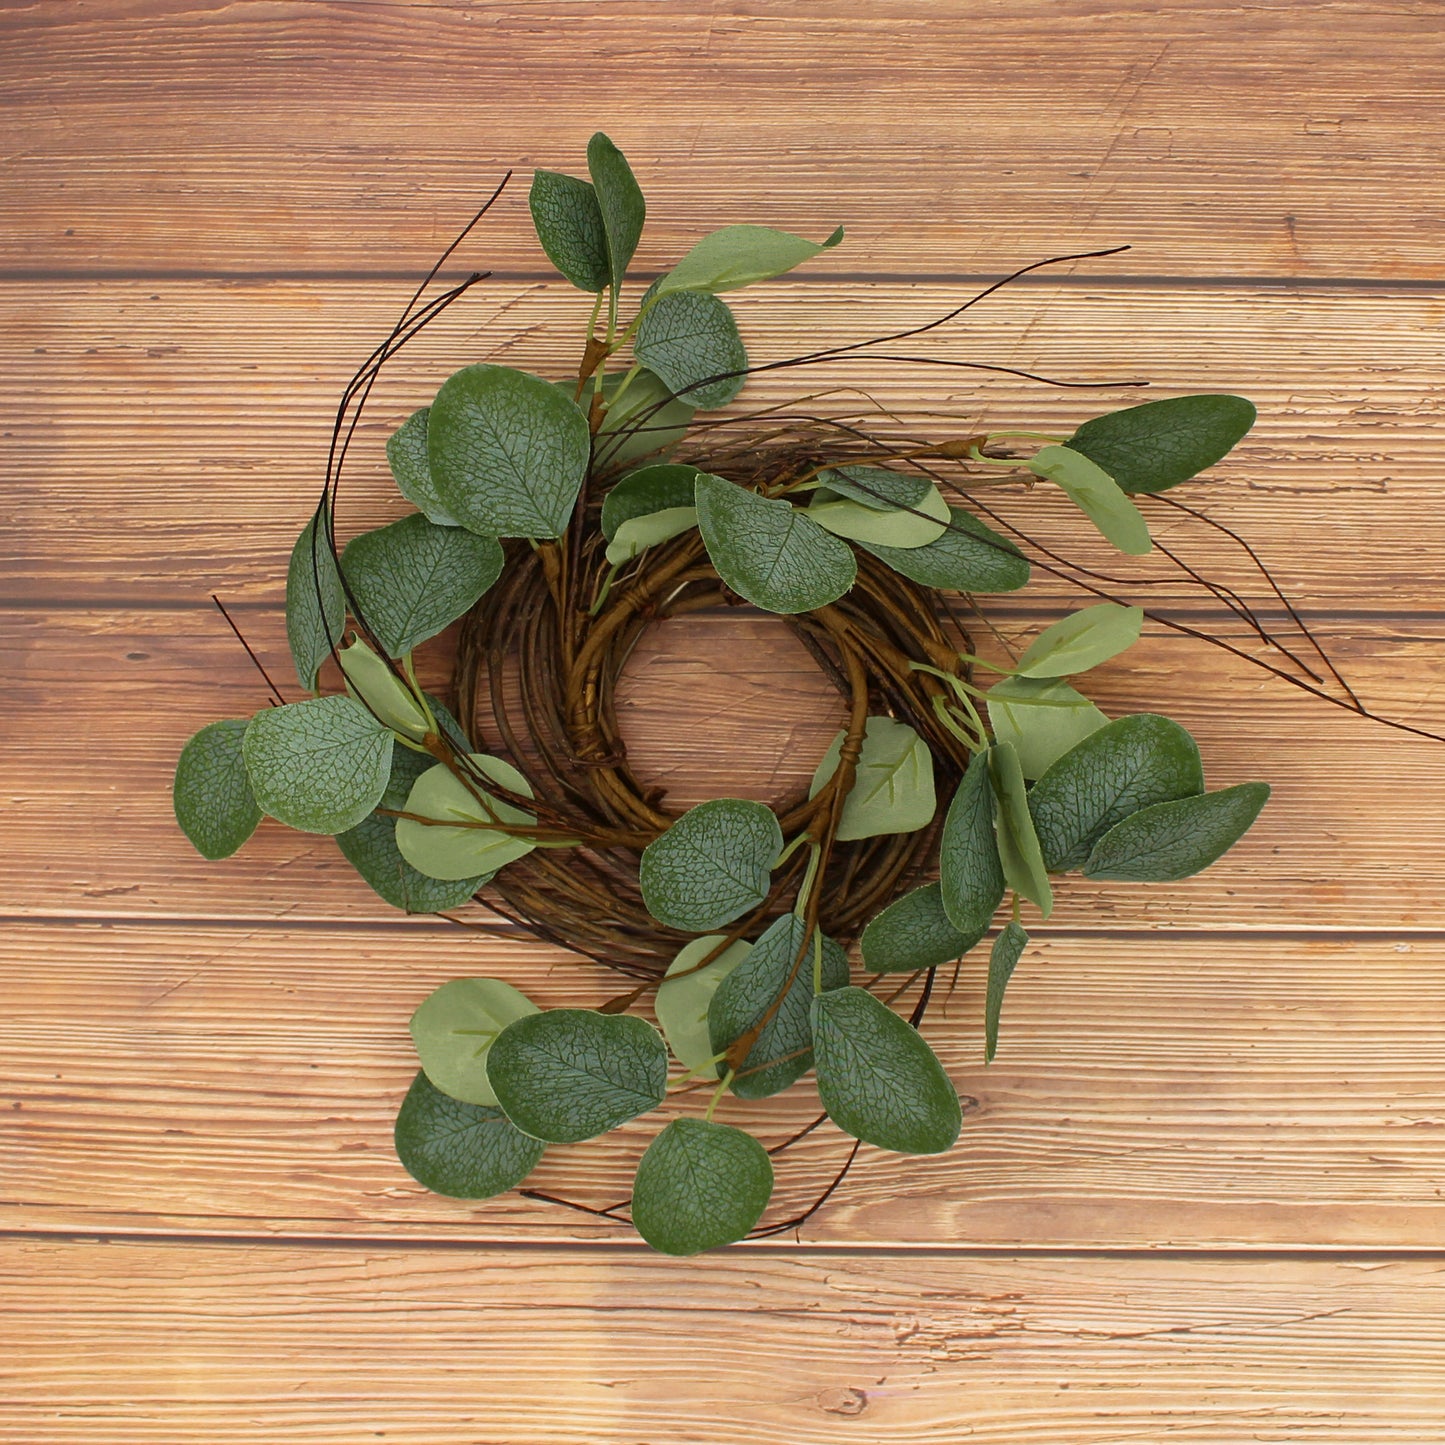 CVHOMEDECO. Rustic Country Artificial Eucalyptus Leaves and Twig Wreath, Year Round Full Green Wreath for Indoor or Outdoor Display, 9 Inch